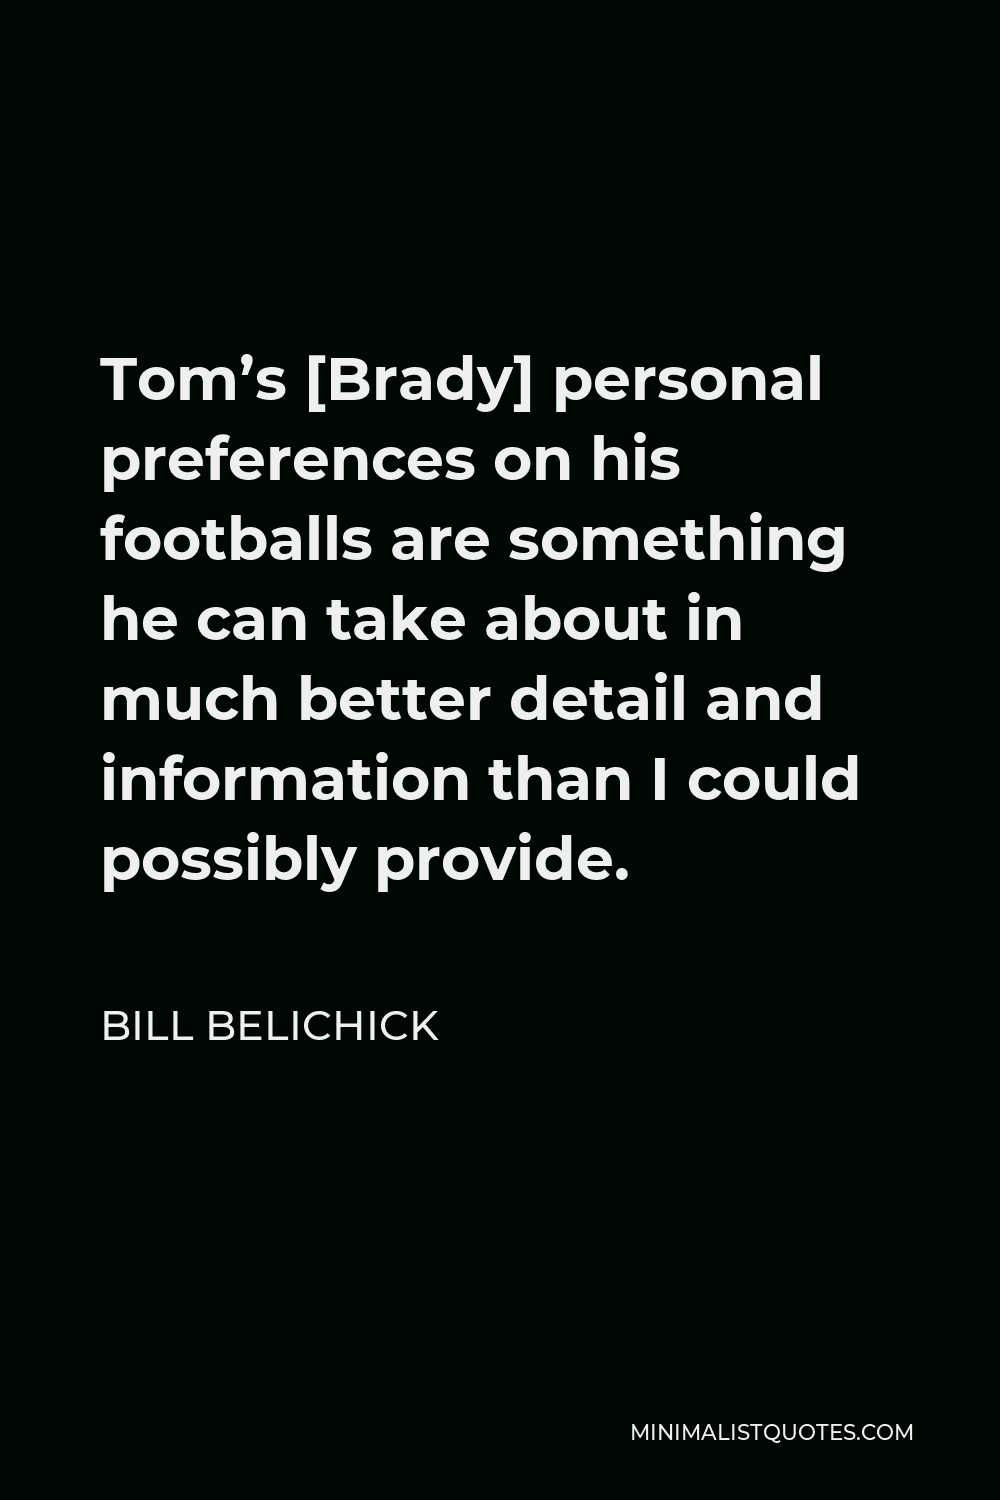 Bill Belichick Quote - Tom’s [Brady] personal preferences on his footballs are something he can take about in much better detail and information than I could possibly provide.